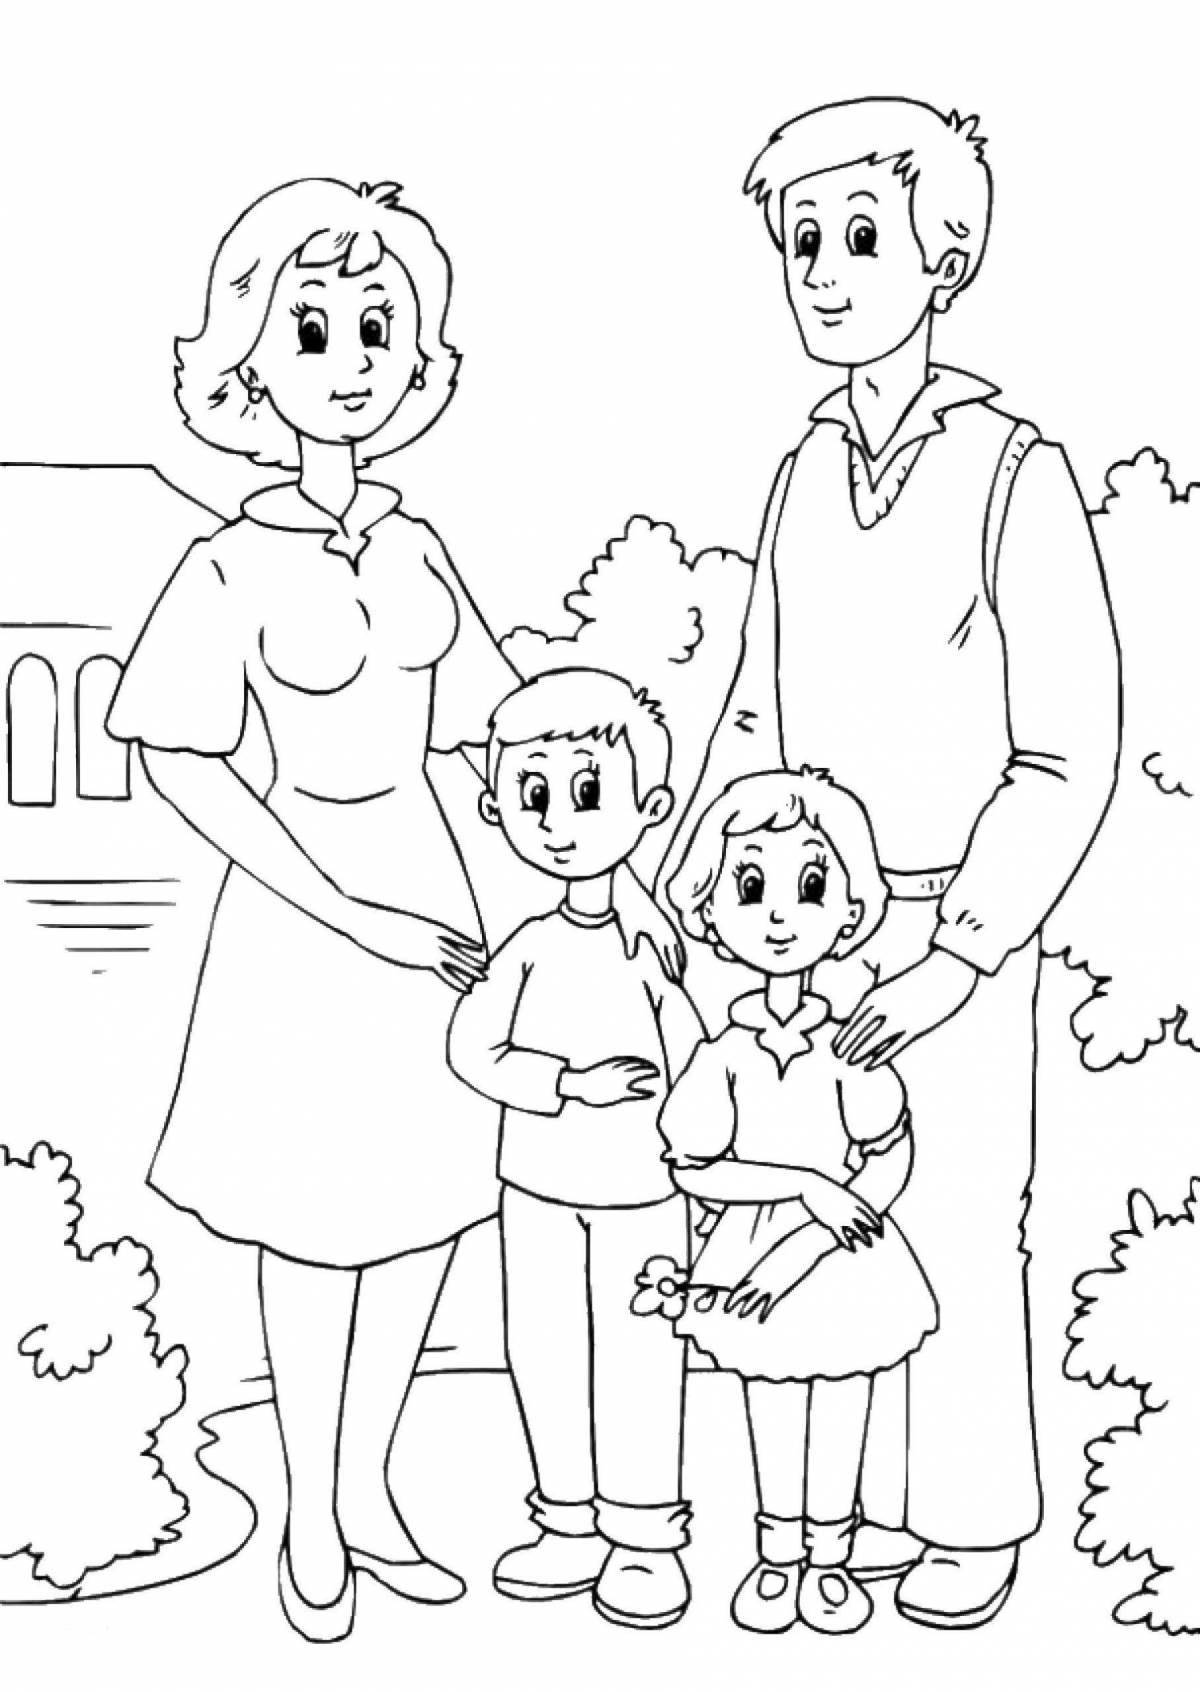 Colorful family coloring book for kids